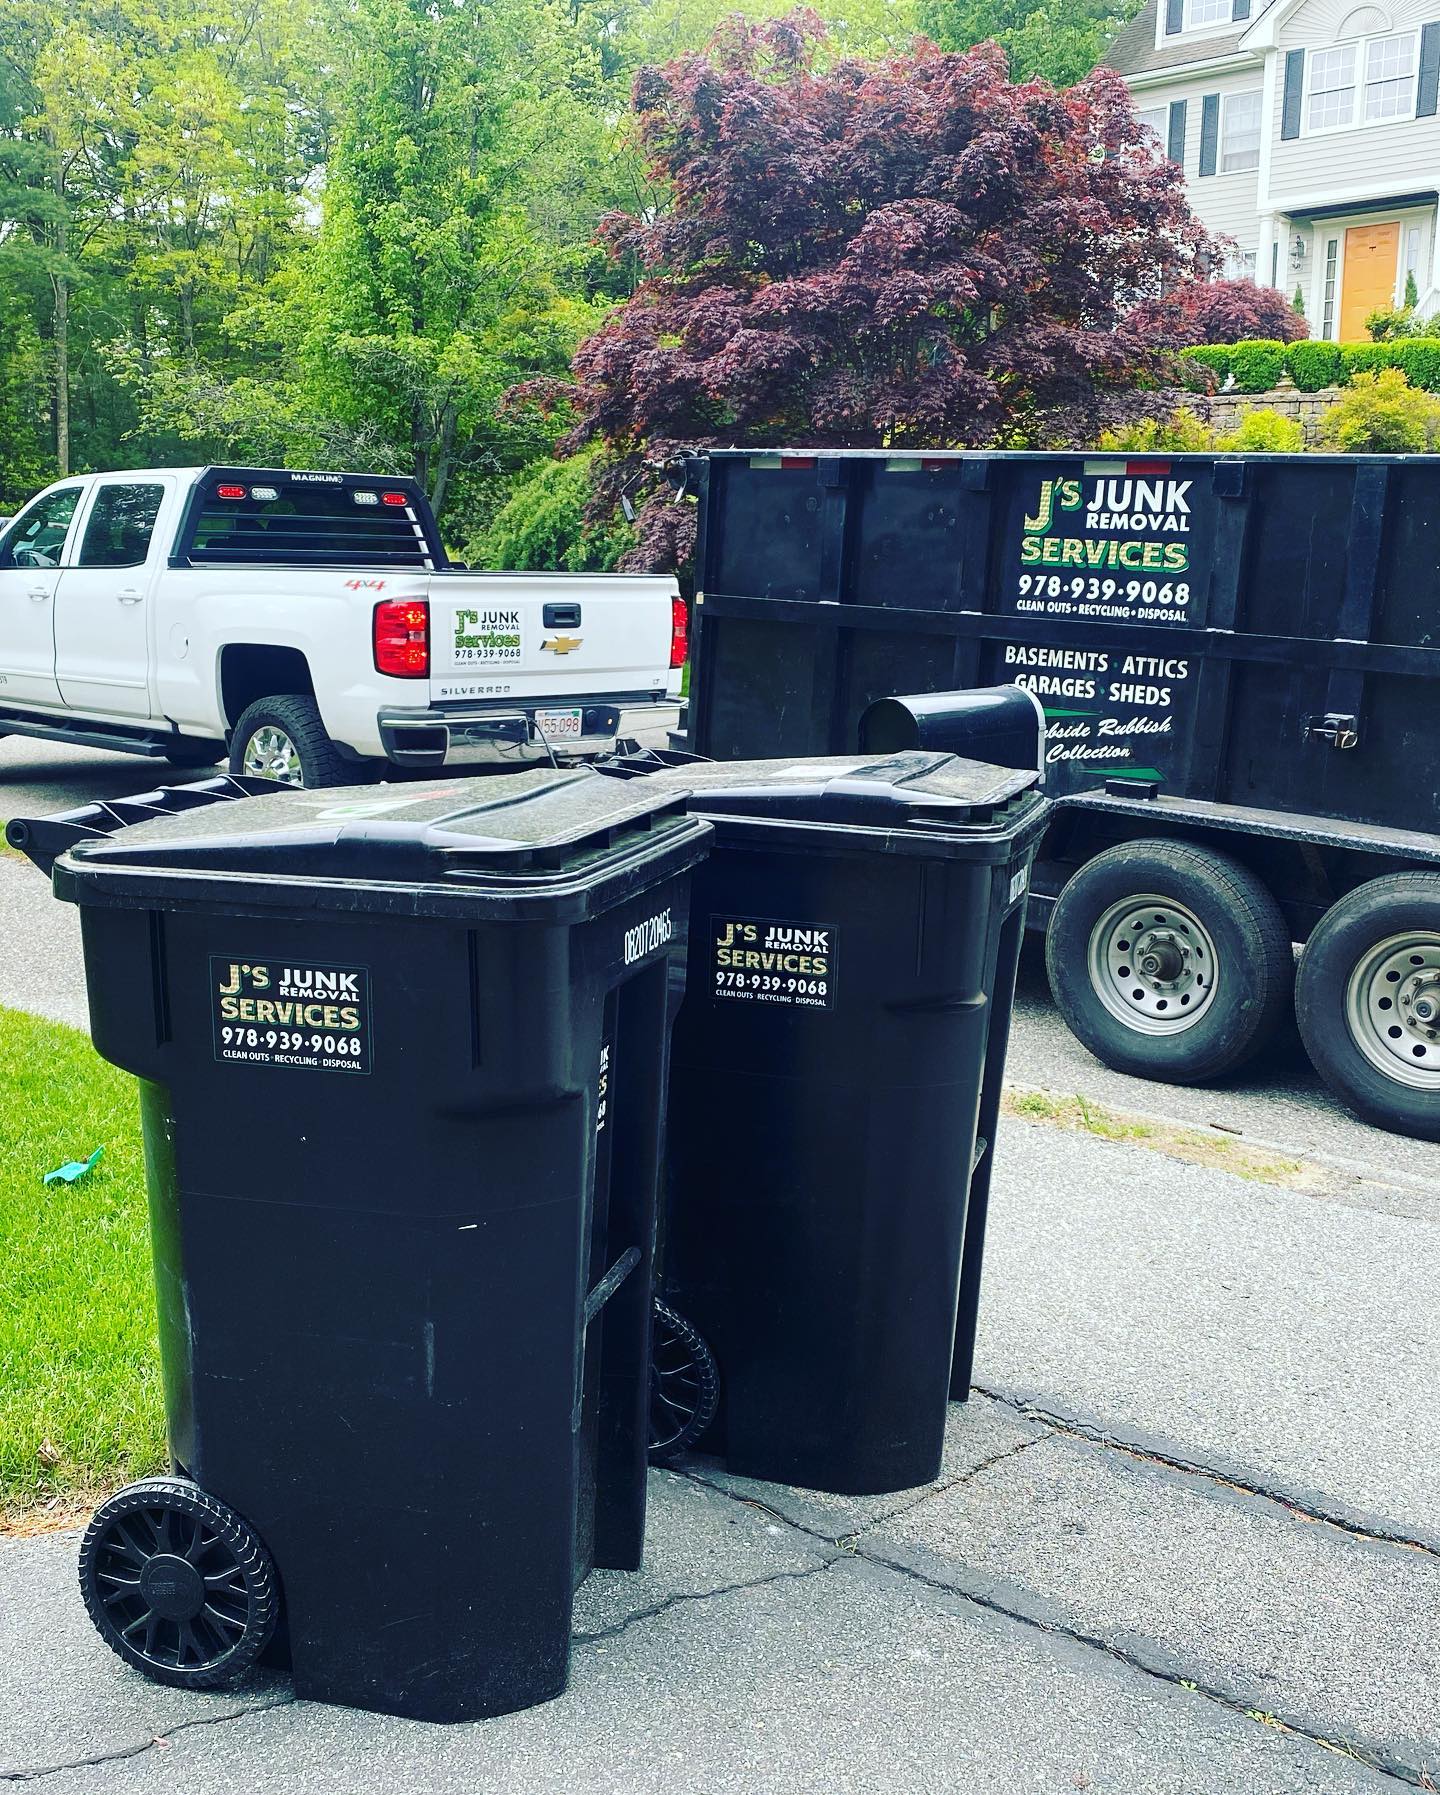 Trash bins for curbside collection